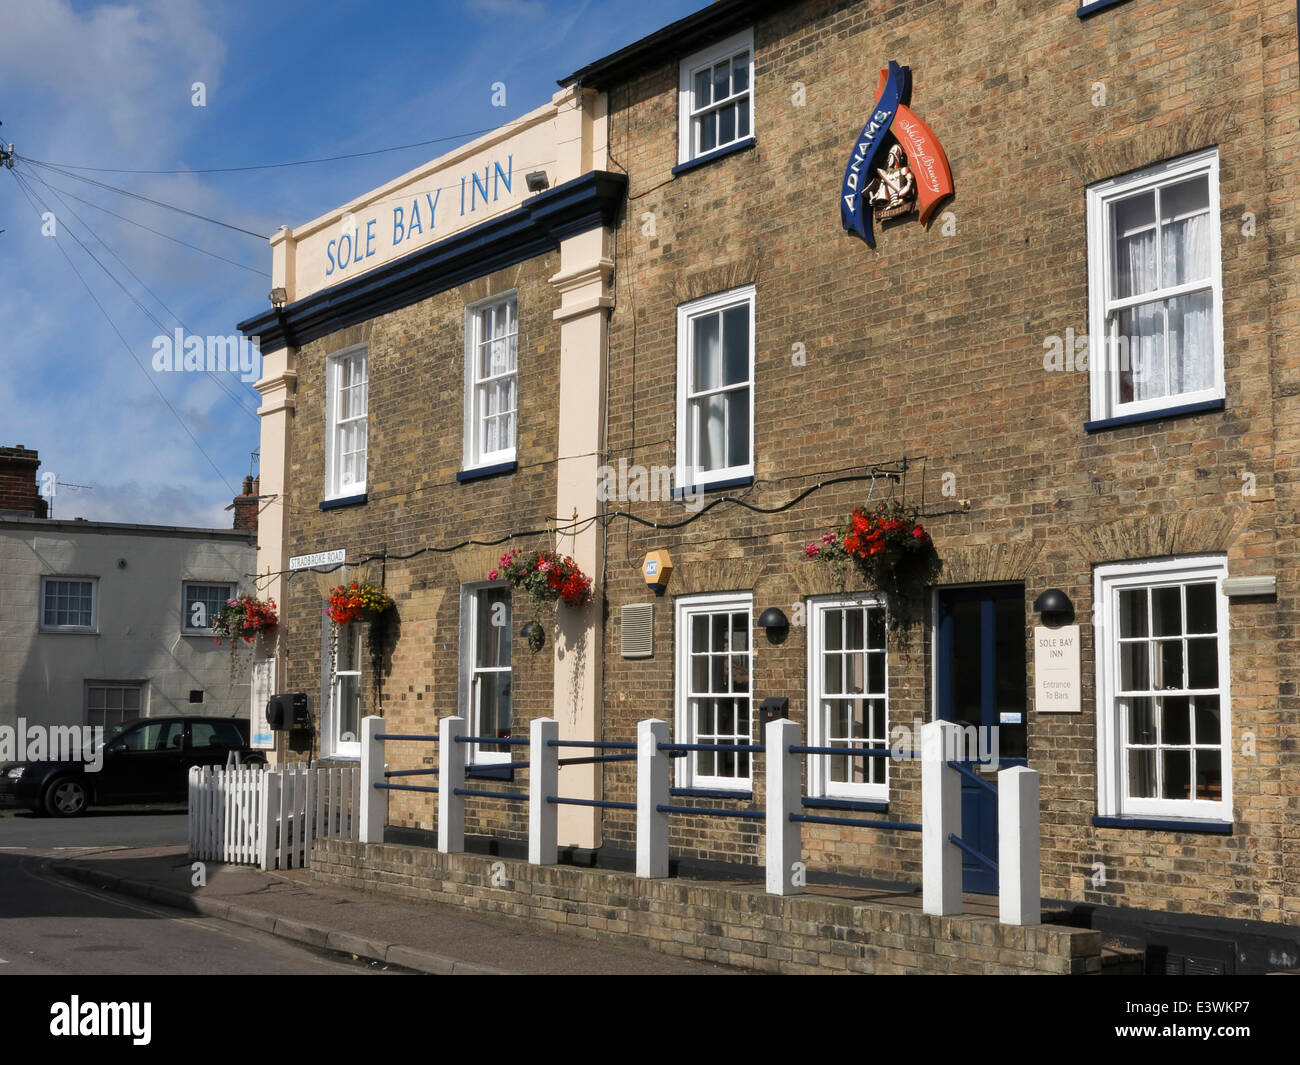 The Sole Bay Inn, in Southwold, Suffolk, England. Stock Photo